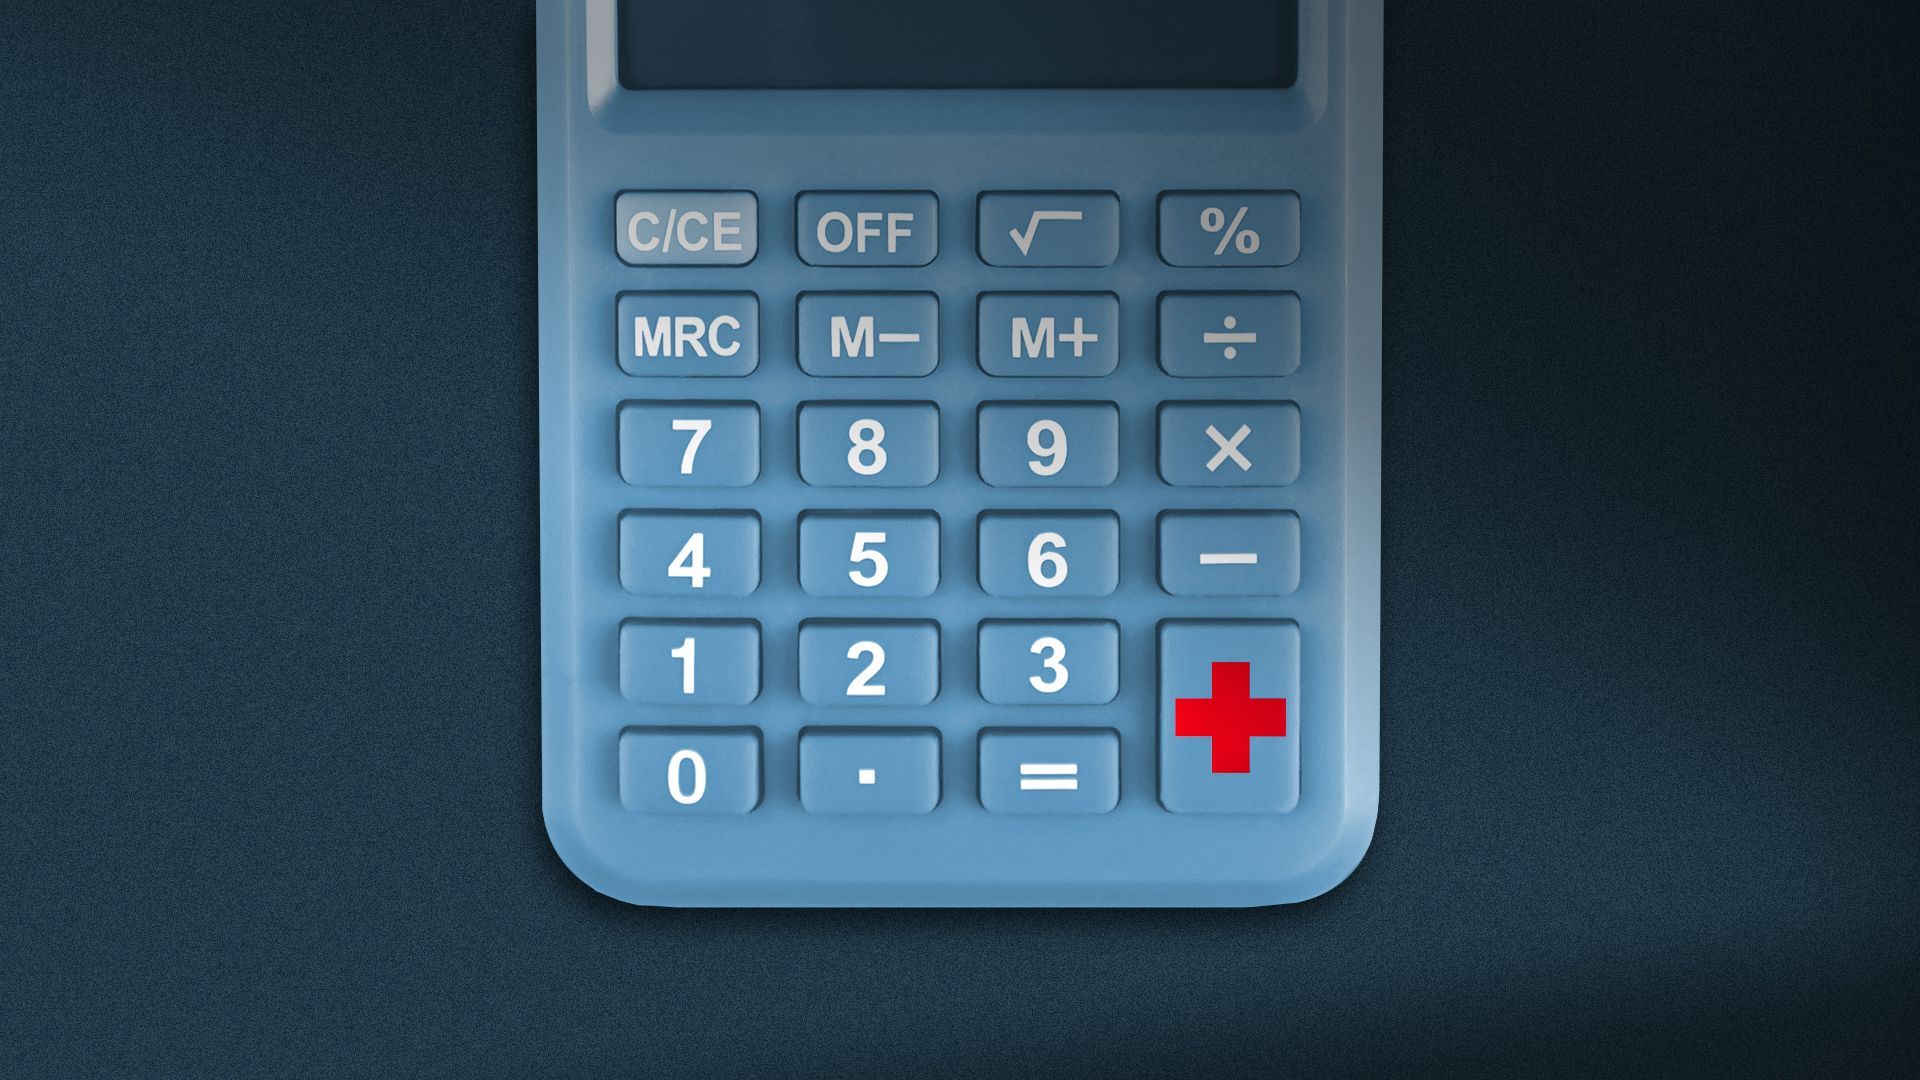 Illustration of a calculator with the addition button symbol replaced by a red medical cross symbol.